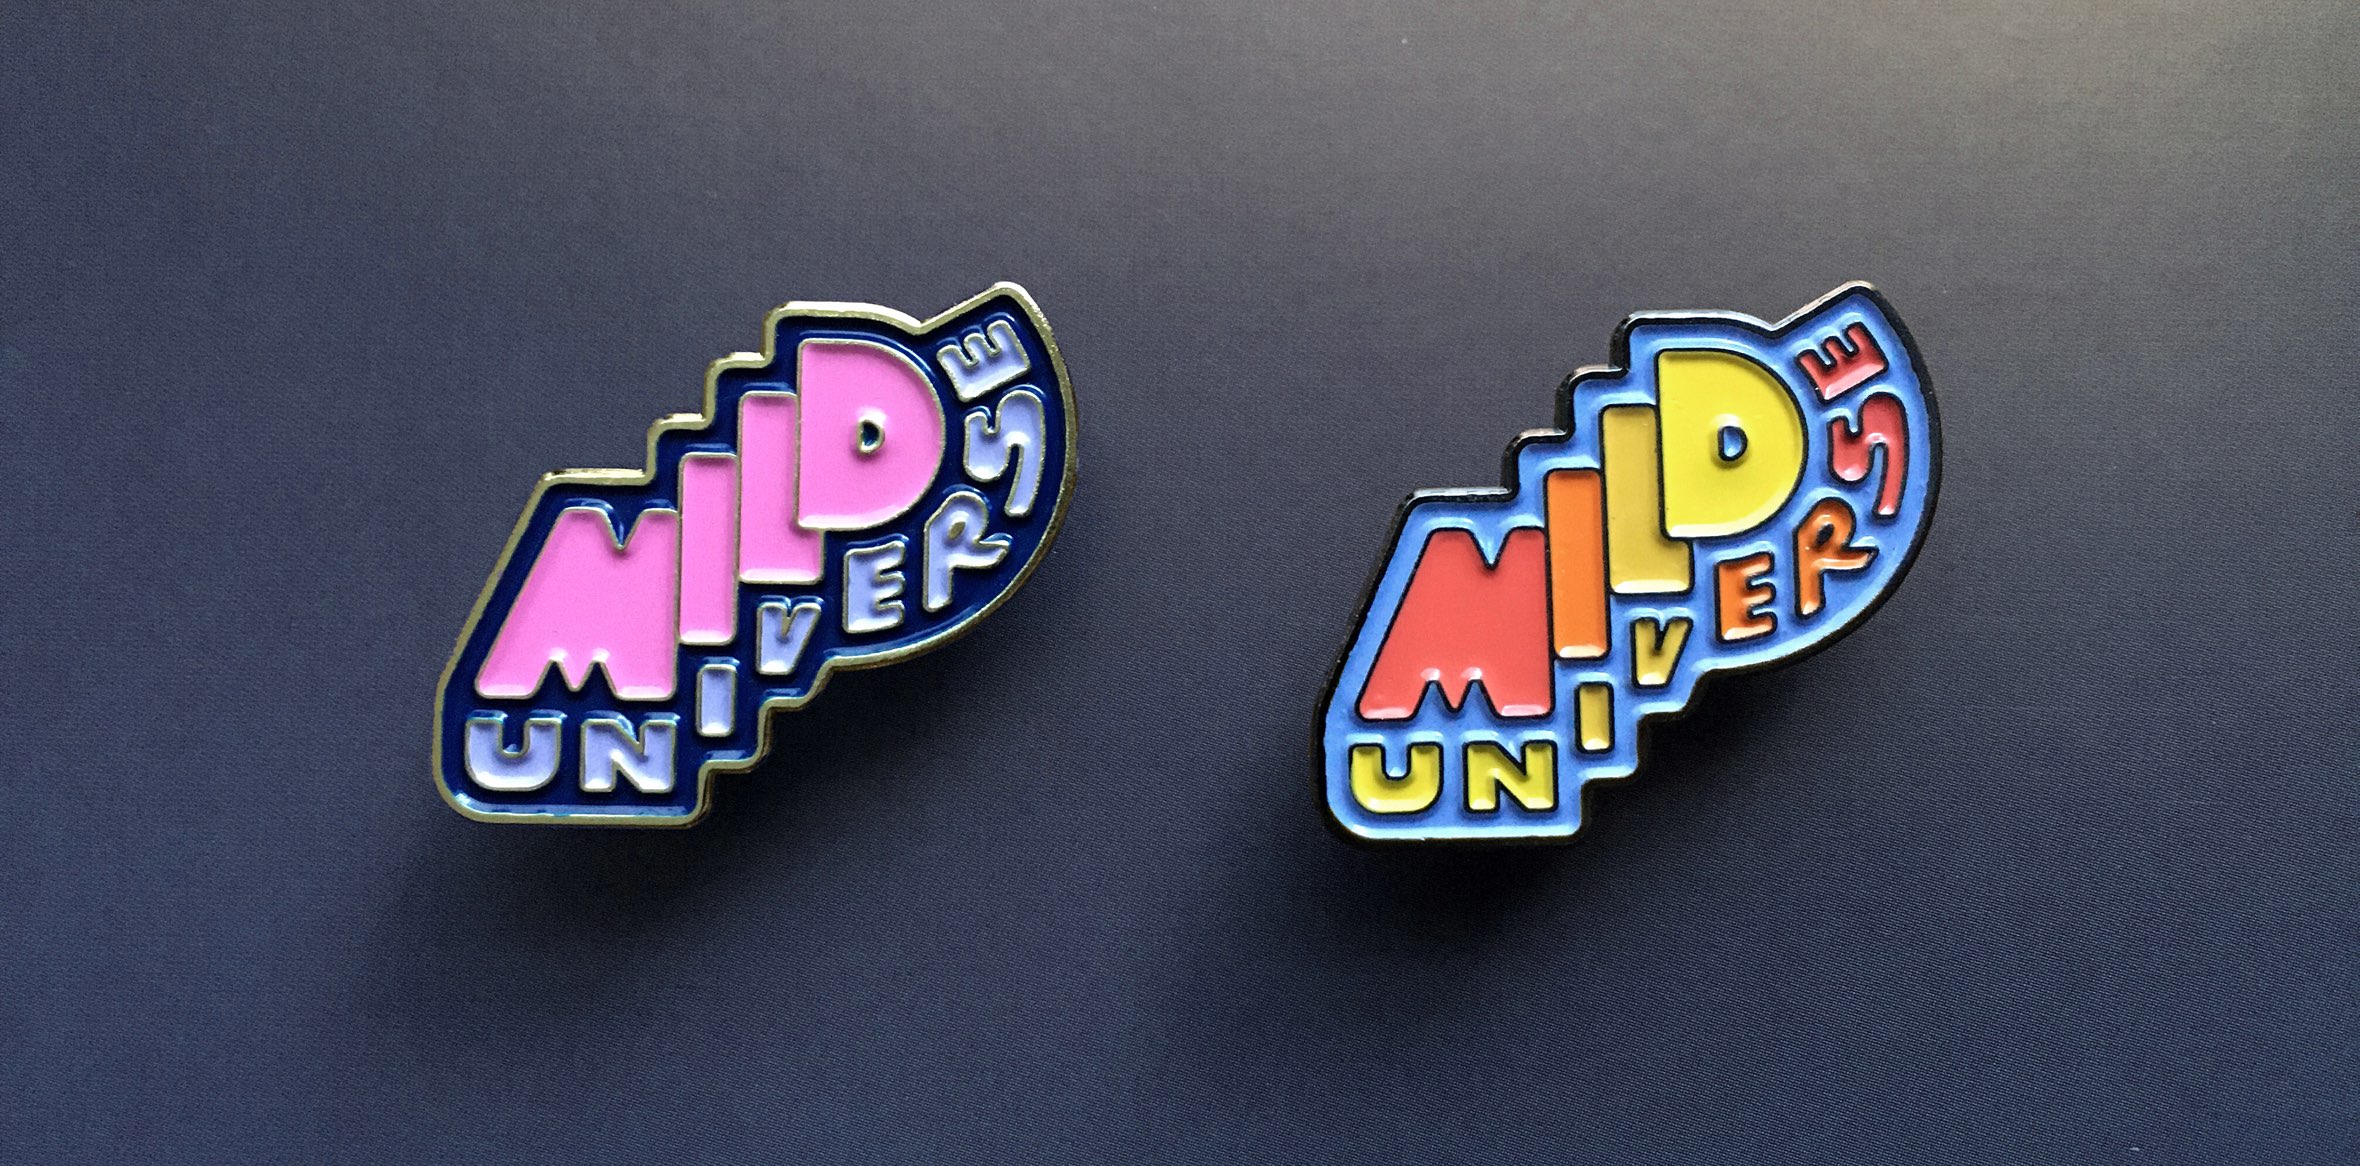 Enamel pins featuring the Mild Universe logo design in both 'Space Candy' and '70's Dinnerware' colorways